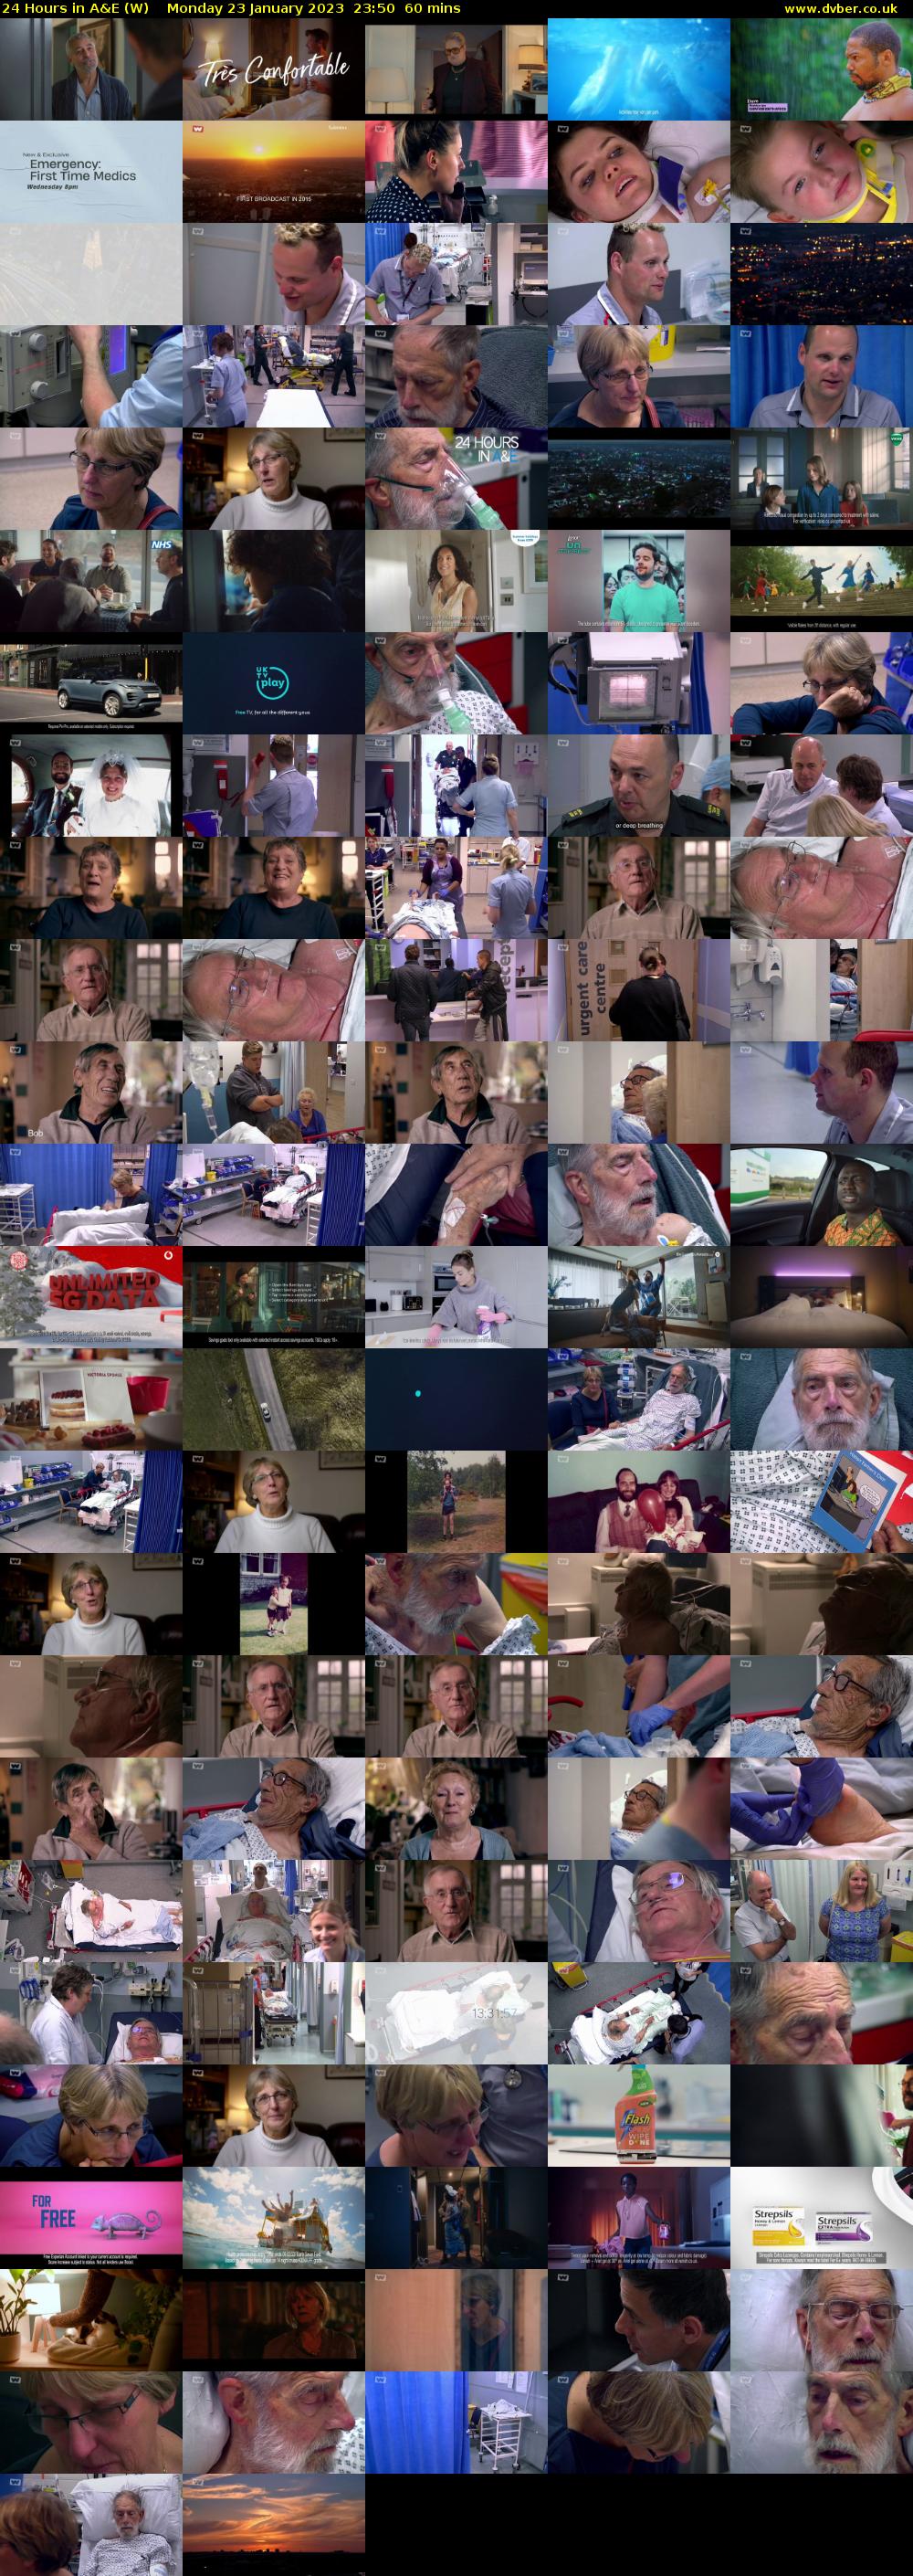 24 Hours in A&E (W) Monday 23 January 2023 23:50 - 00:50